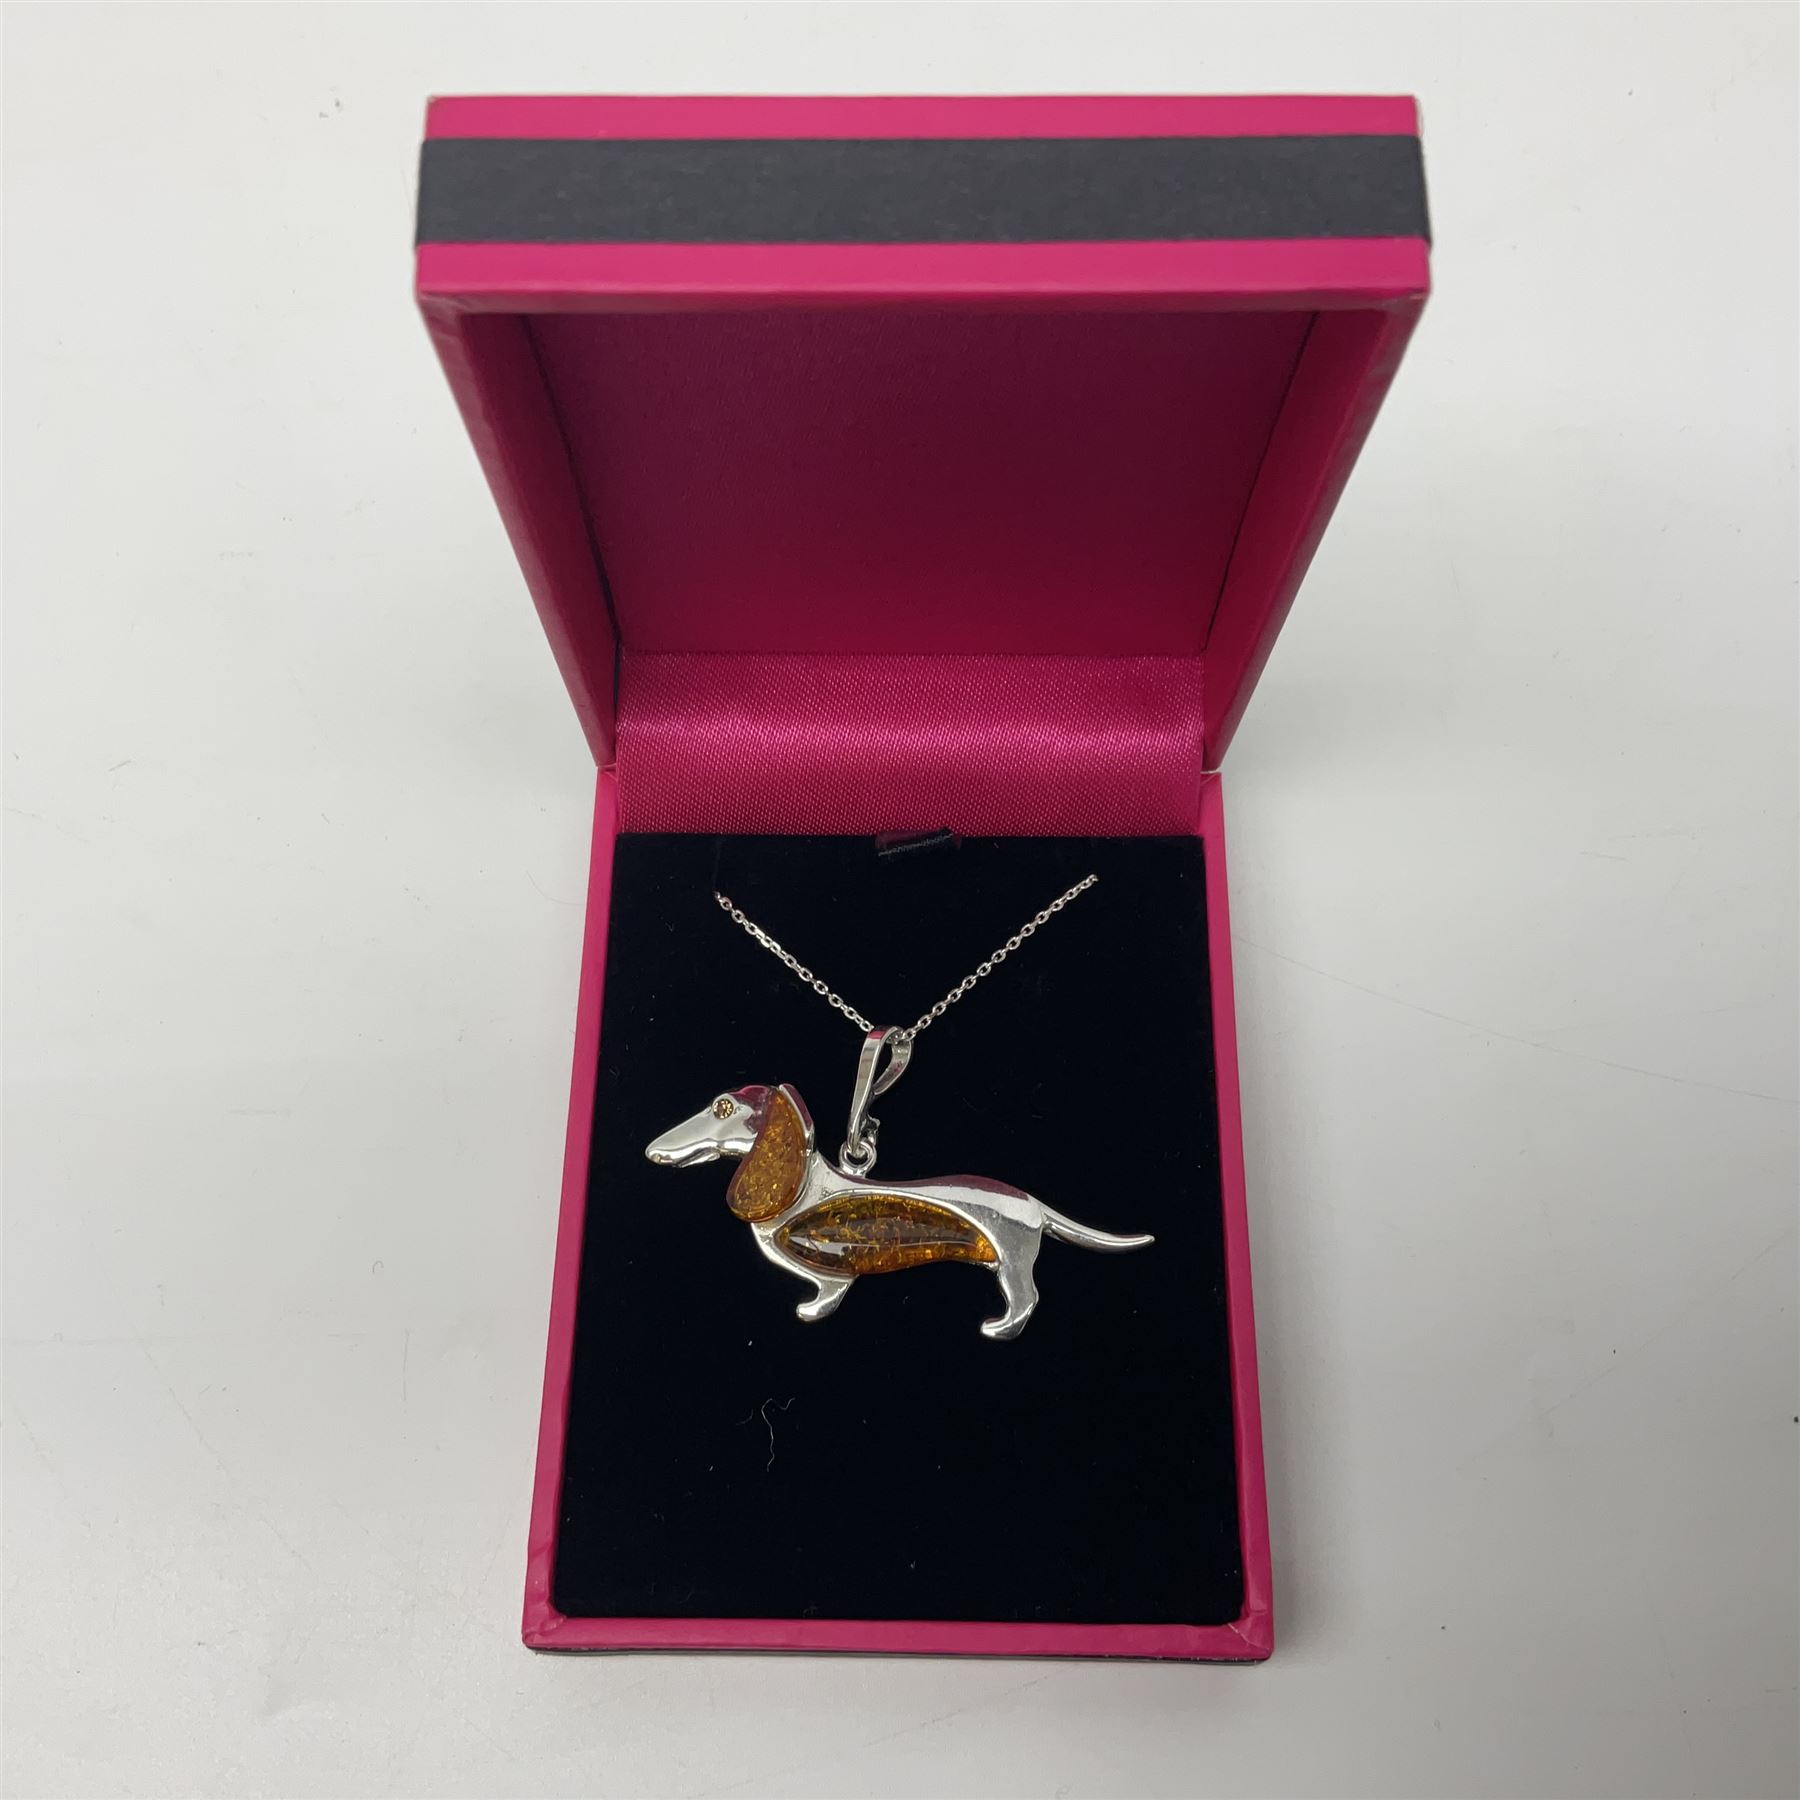 Silver Baltic amber Dachshund pendant necklace - Image 2 of 4